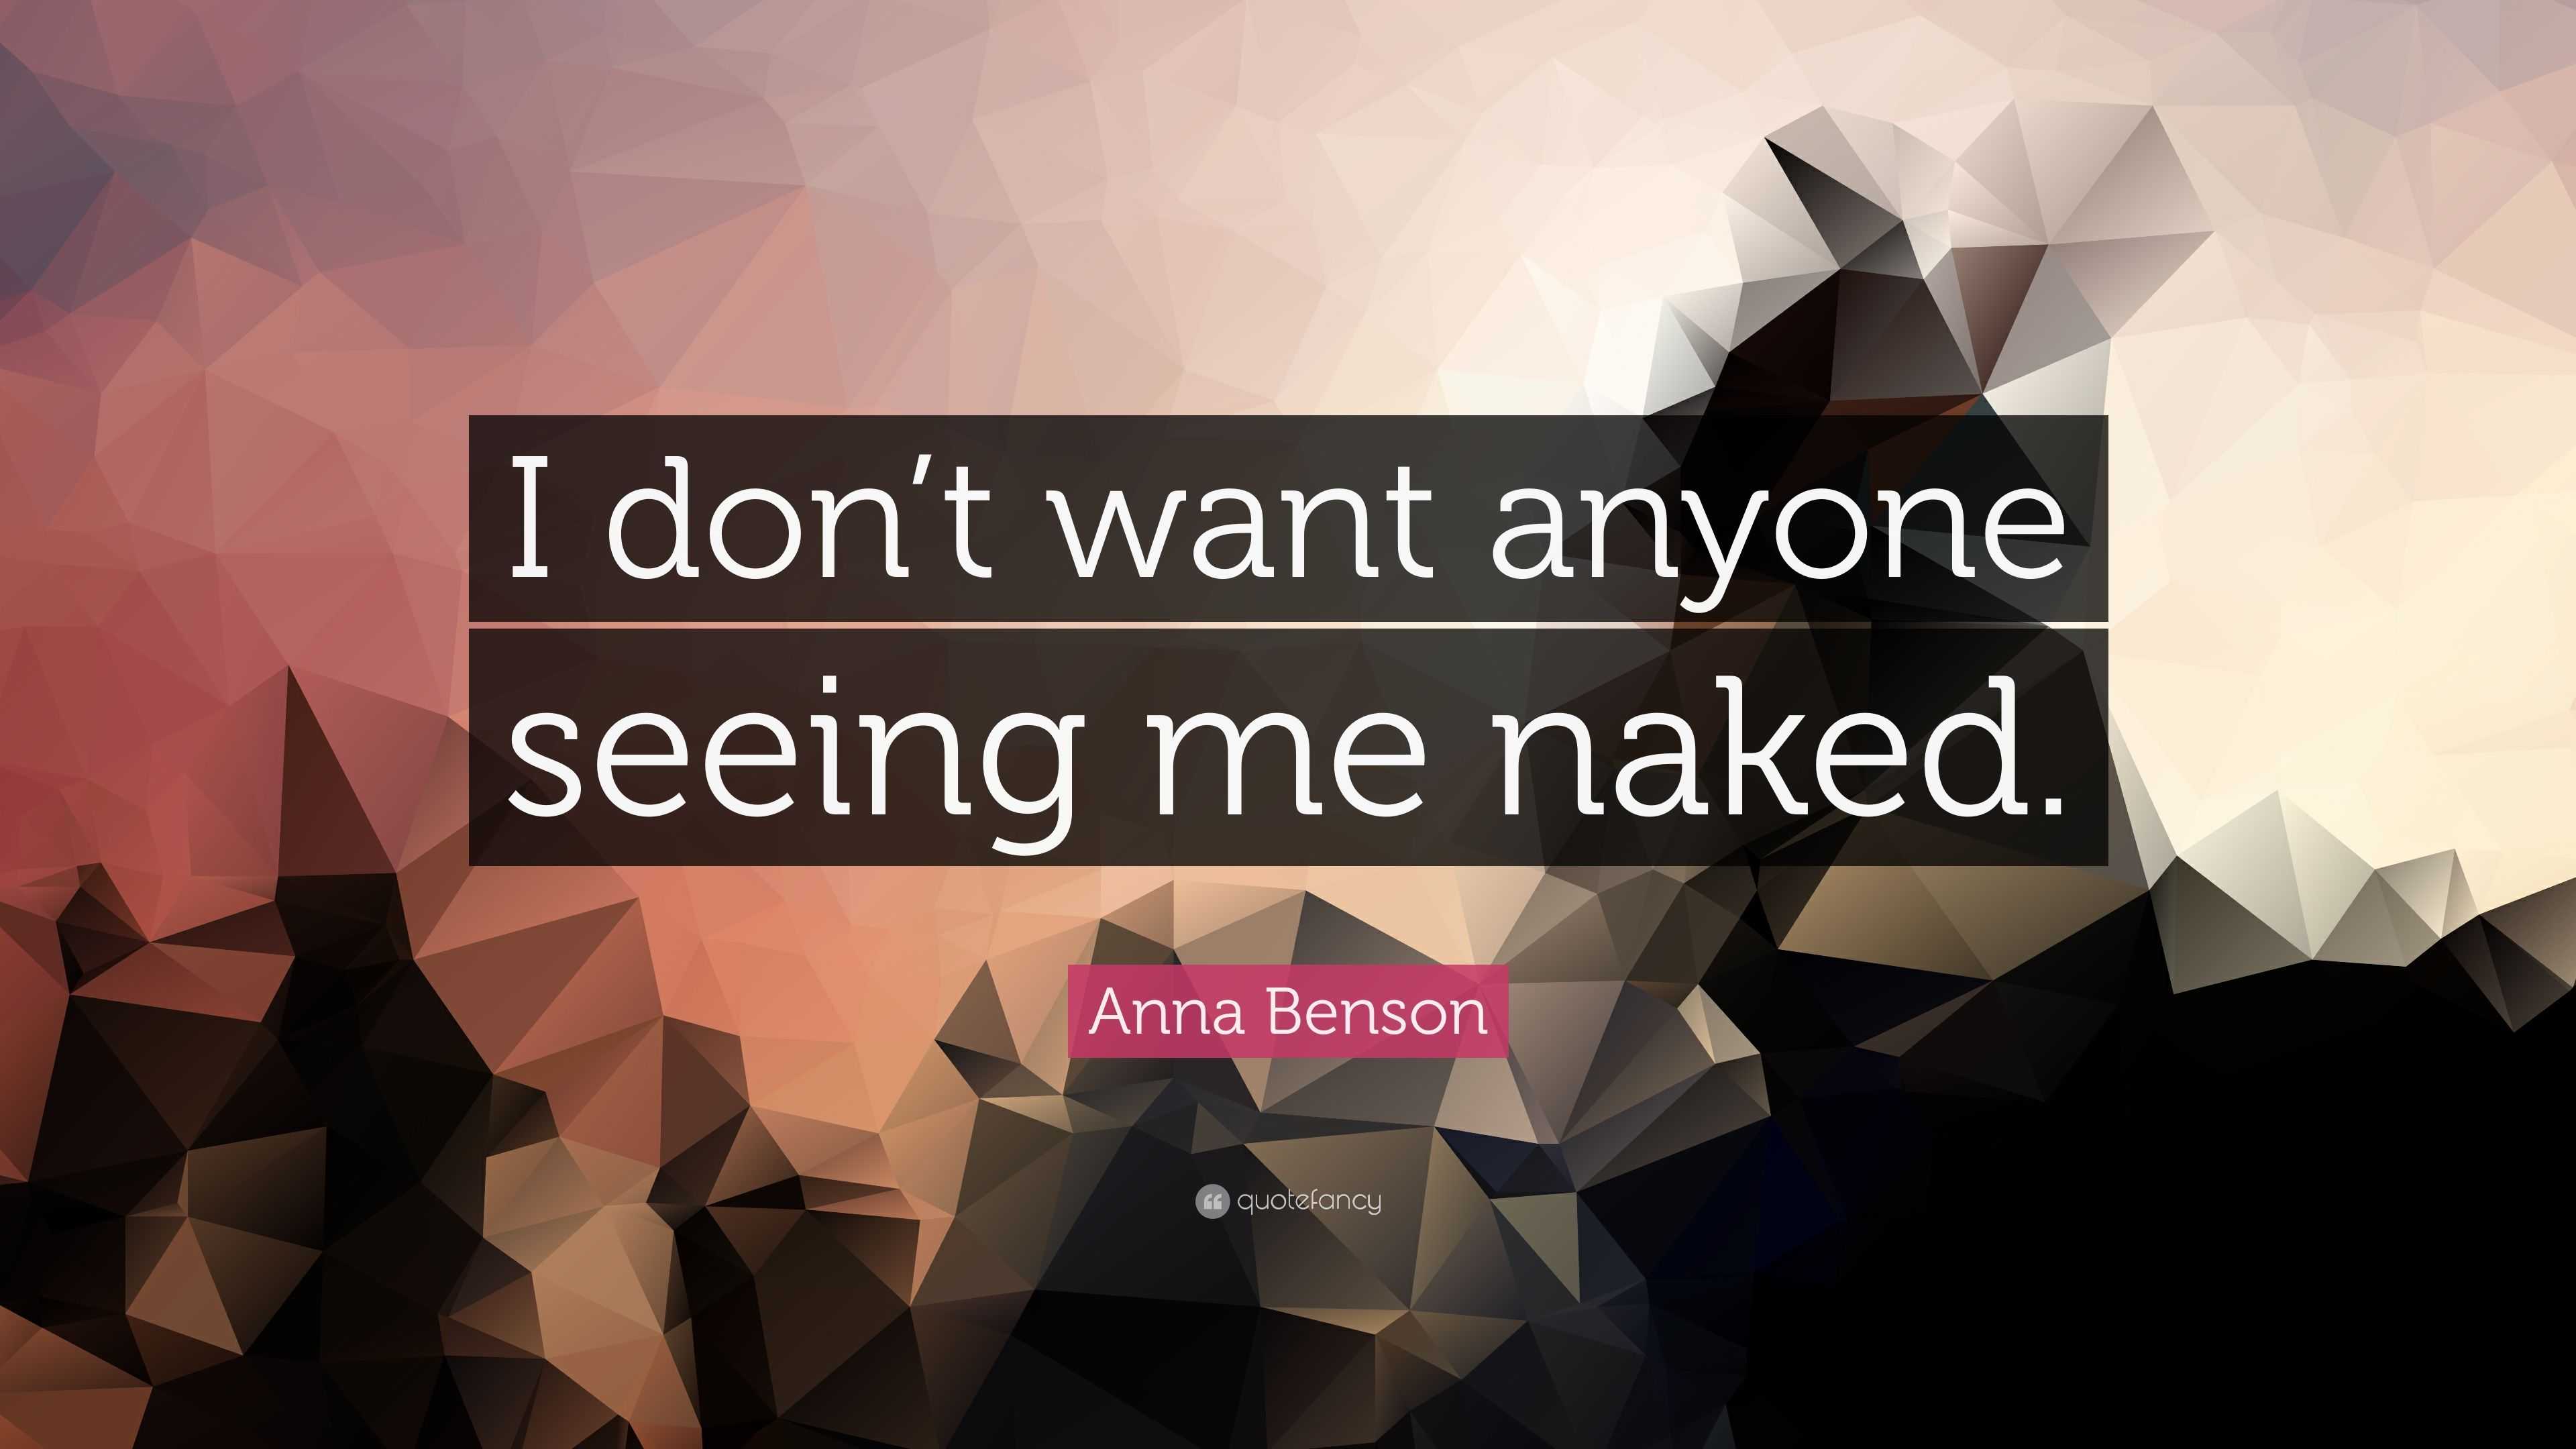 alex carpentier recommends anna benson naked pic